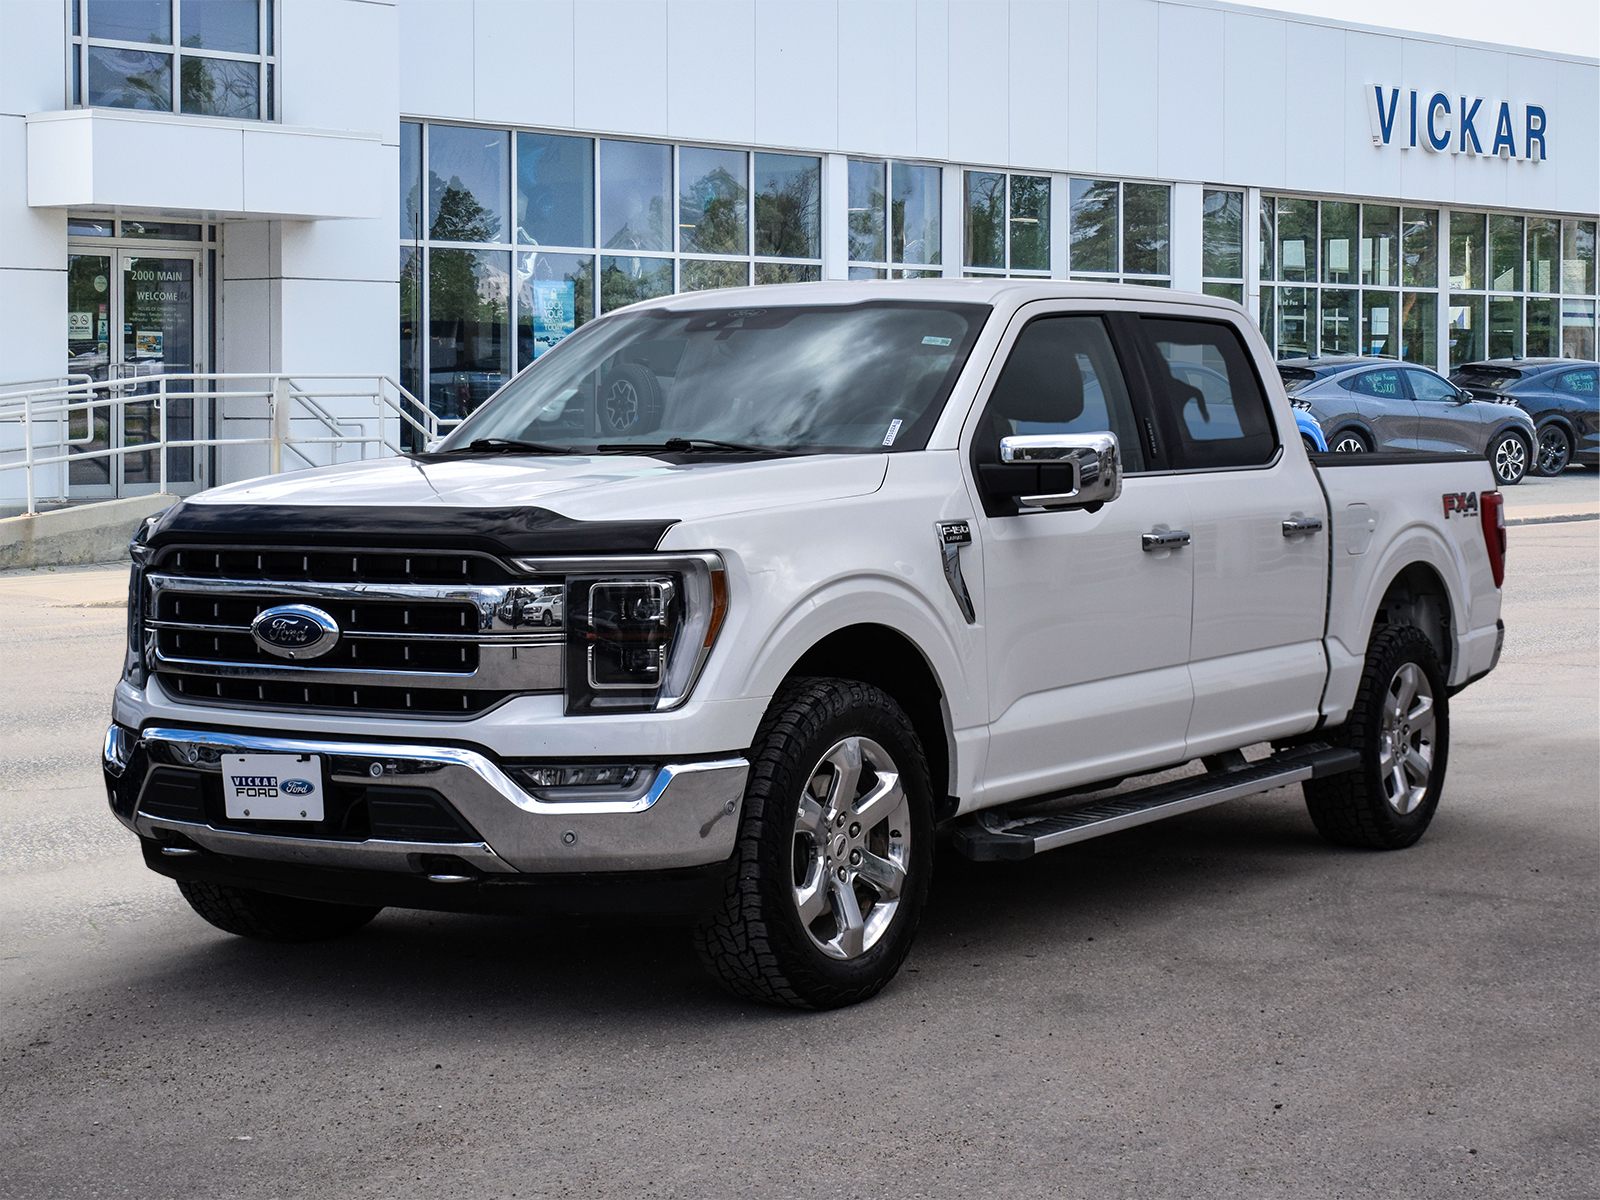 2021 Ford F-150 LARIAT 4WD Crew 502A 3.5L Ecoboost